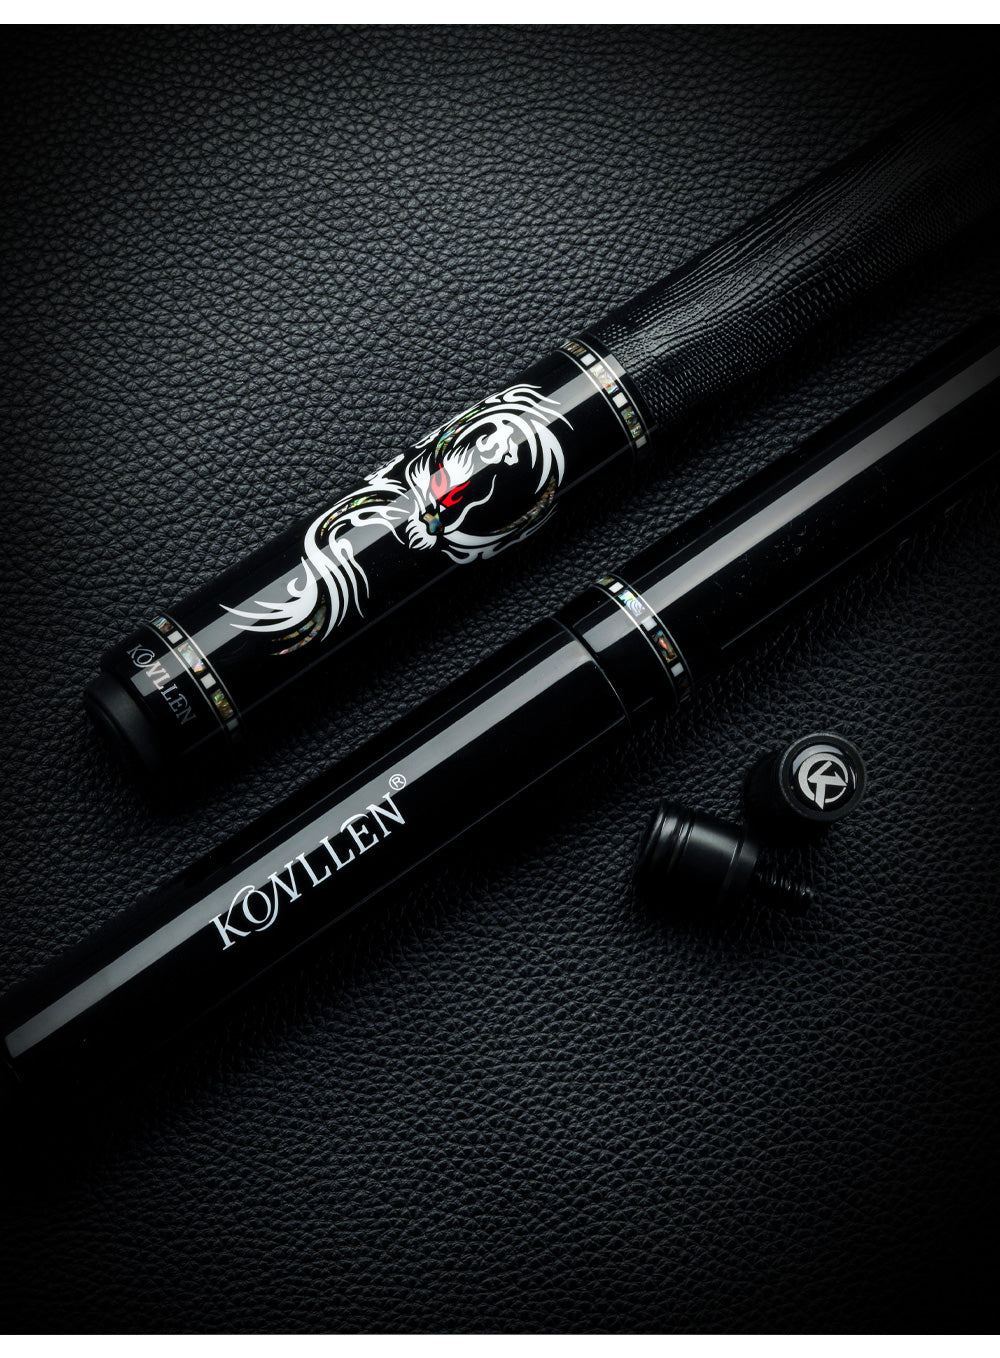 KONLLEN Carbon Fiber Pool Cue Stick Real Inlay Carbon Energy Technology Leather Grip Kit with Extension